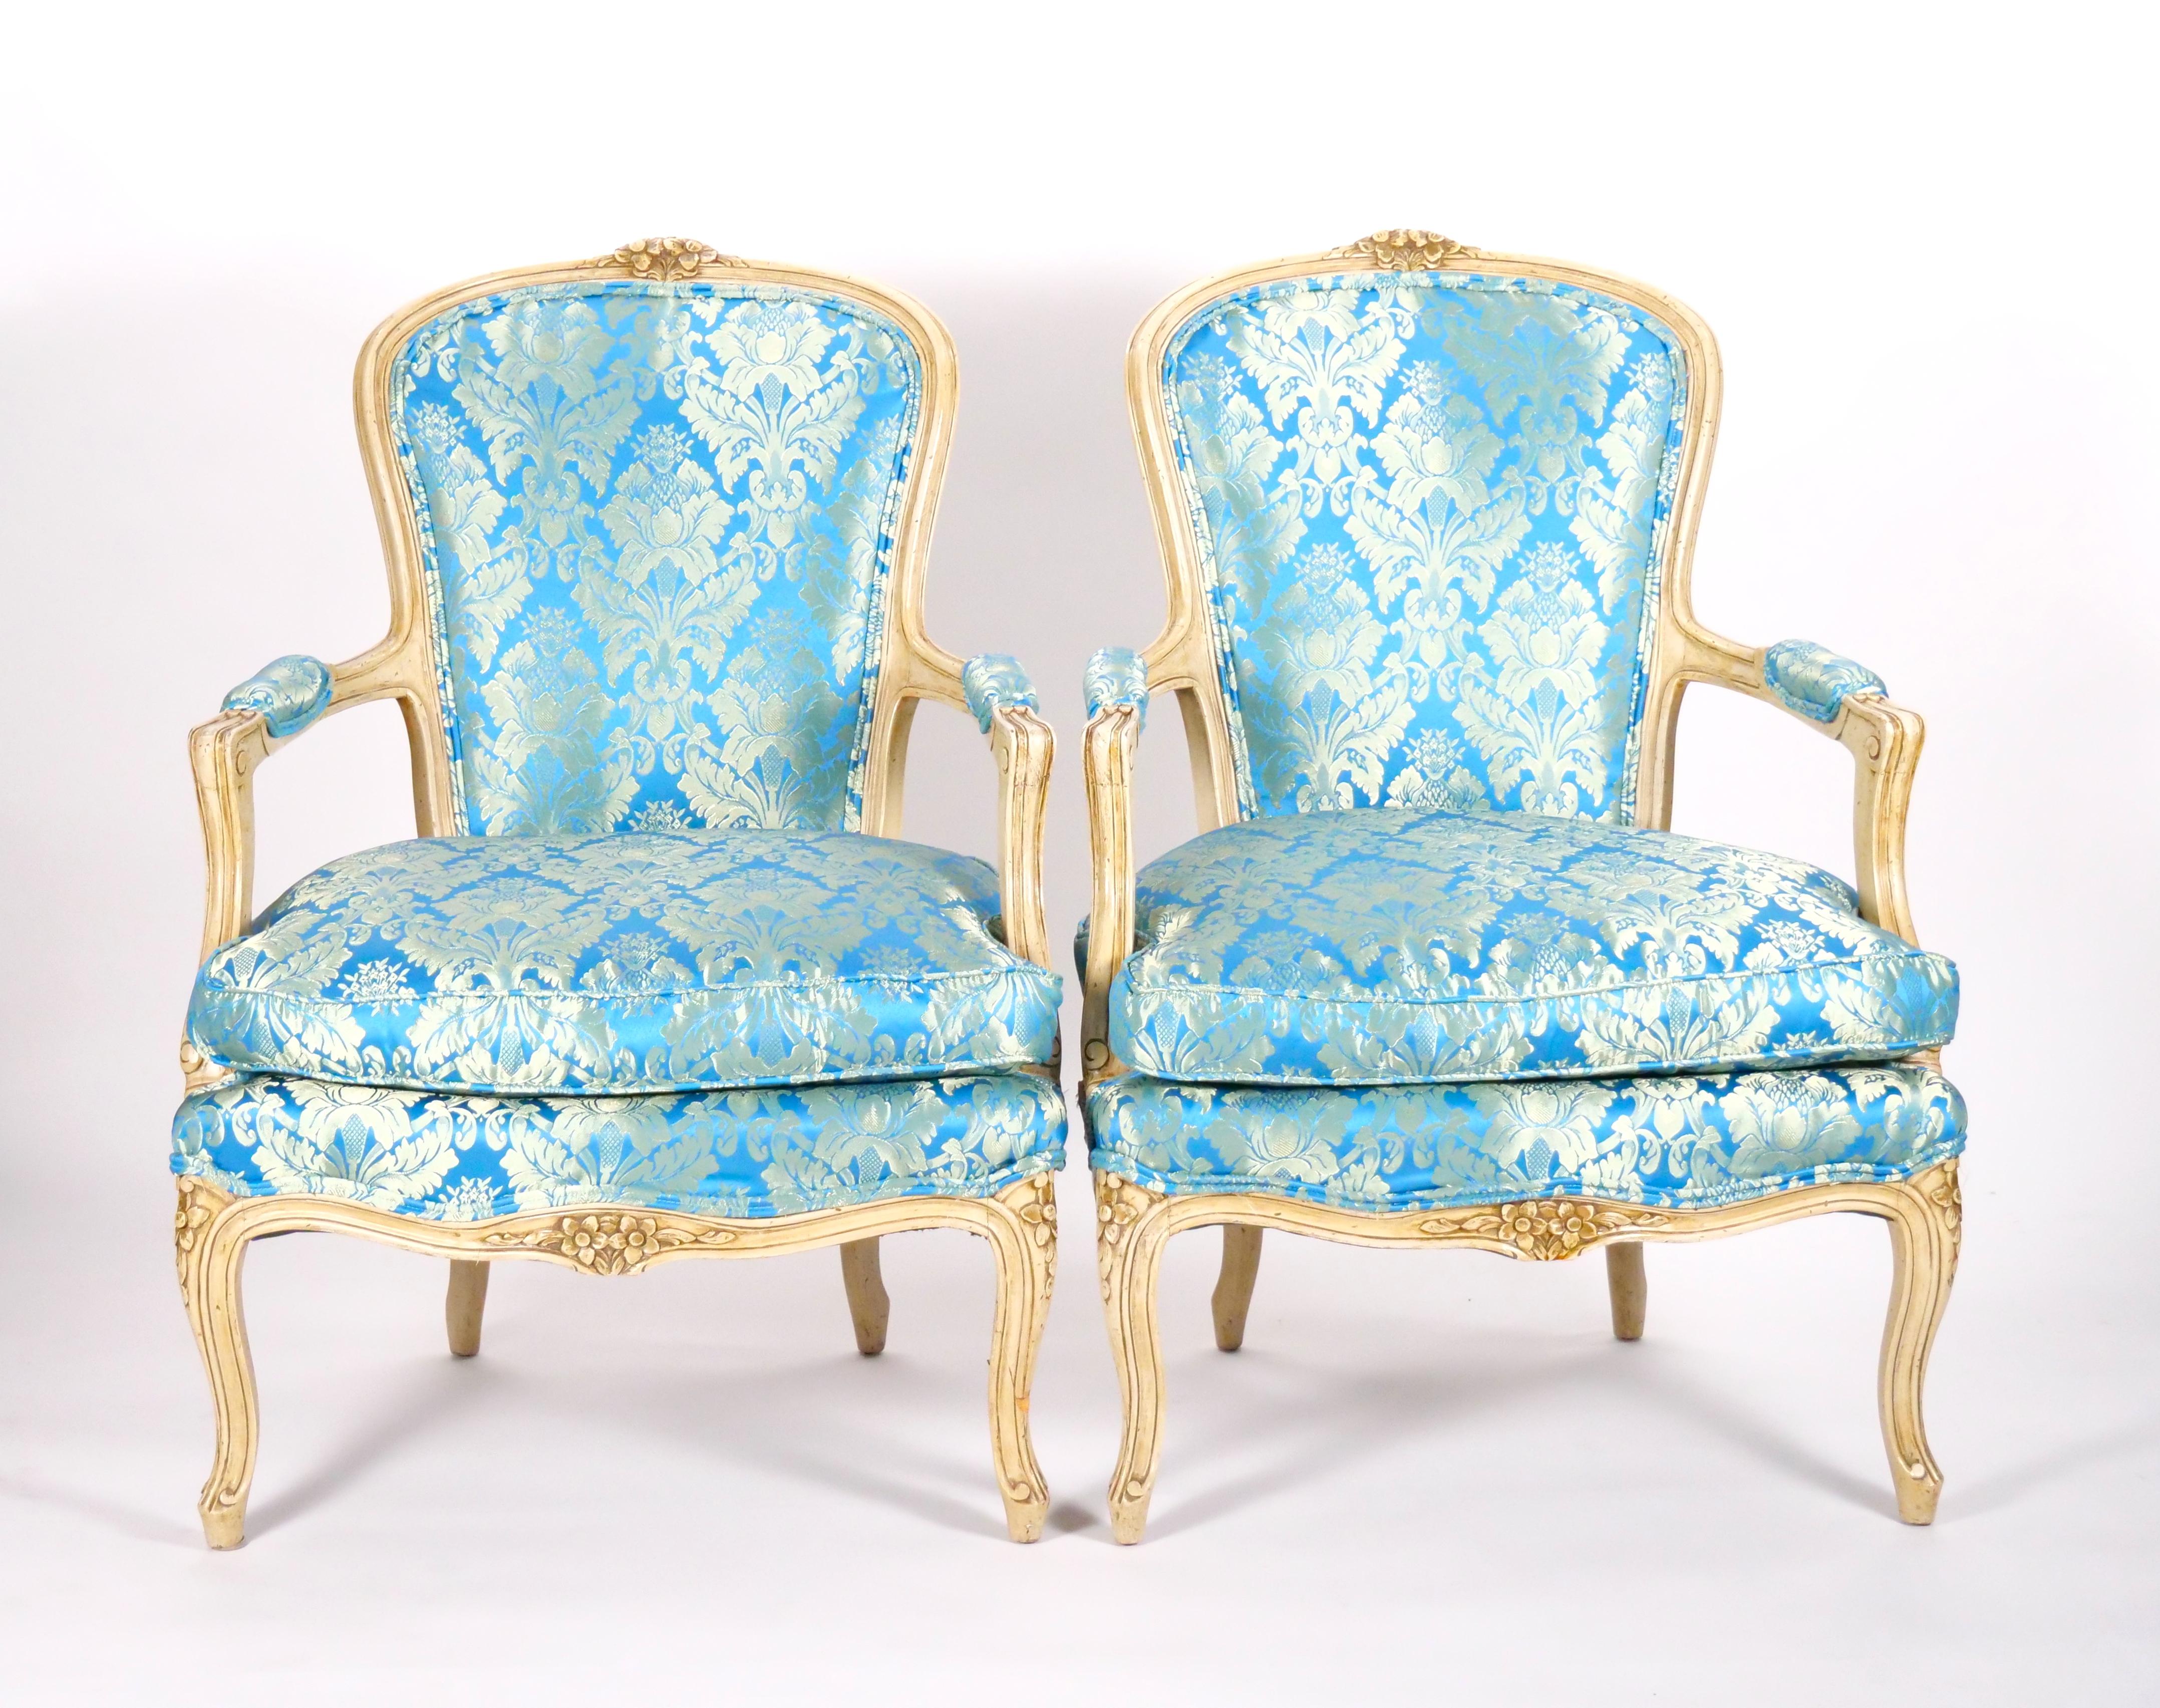 Enhance your interior with this Pair of Antique 19th Century French Fauteuil Arm Chairs, designed in the exquisite Louis XV style. These chairs are more than just seating; they are pieces of art meticulously crafted with attention to detail and a